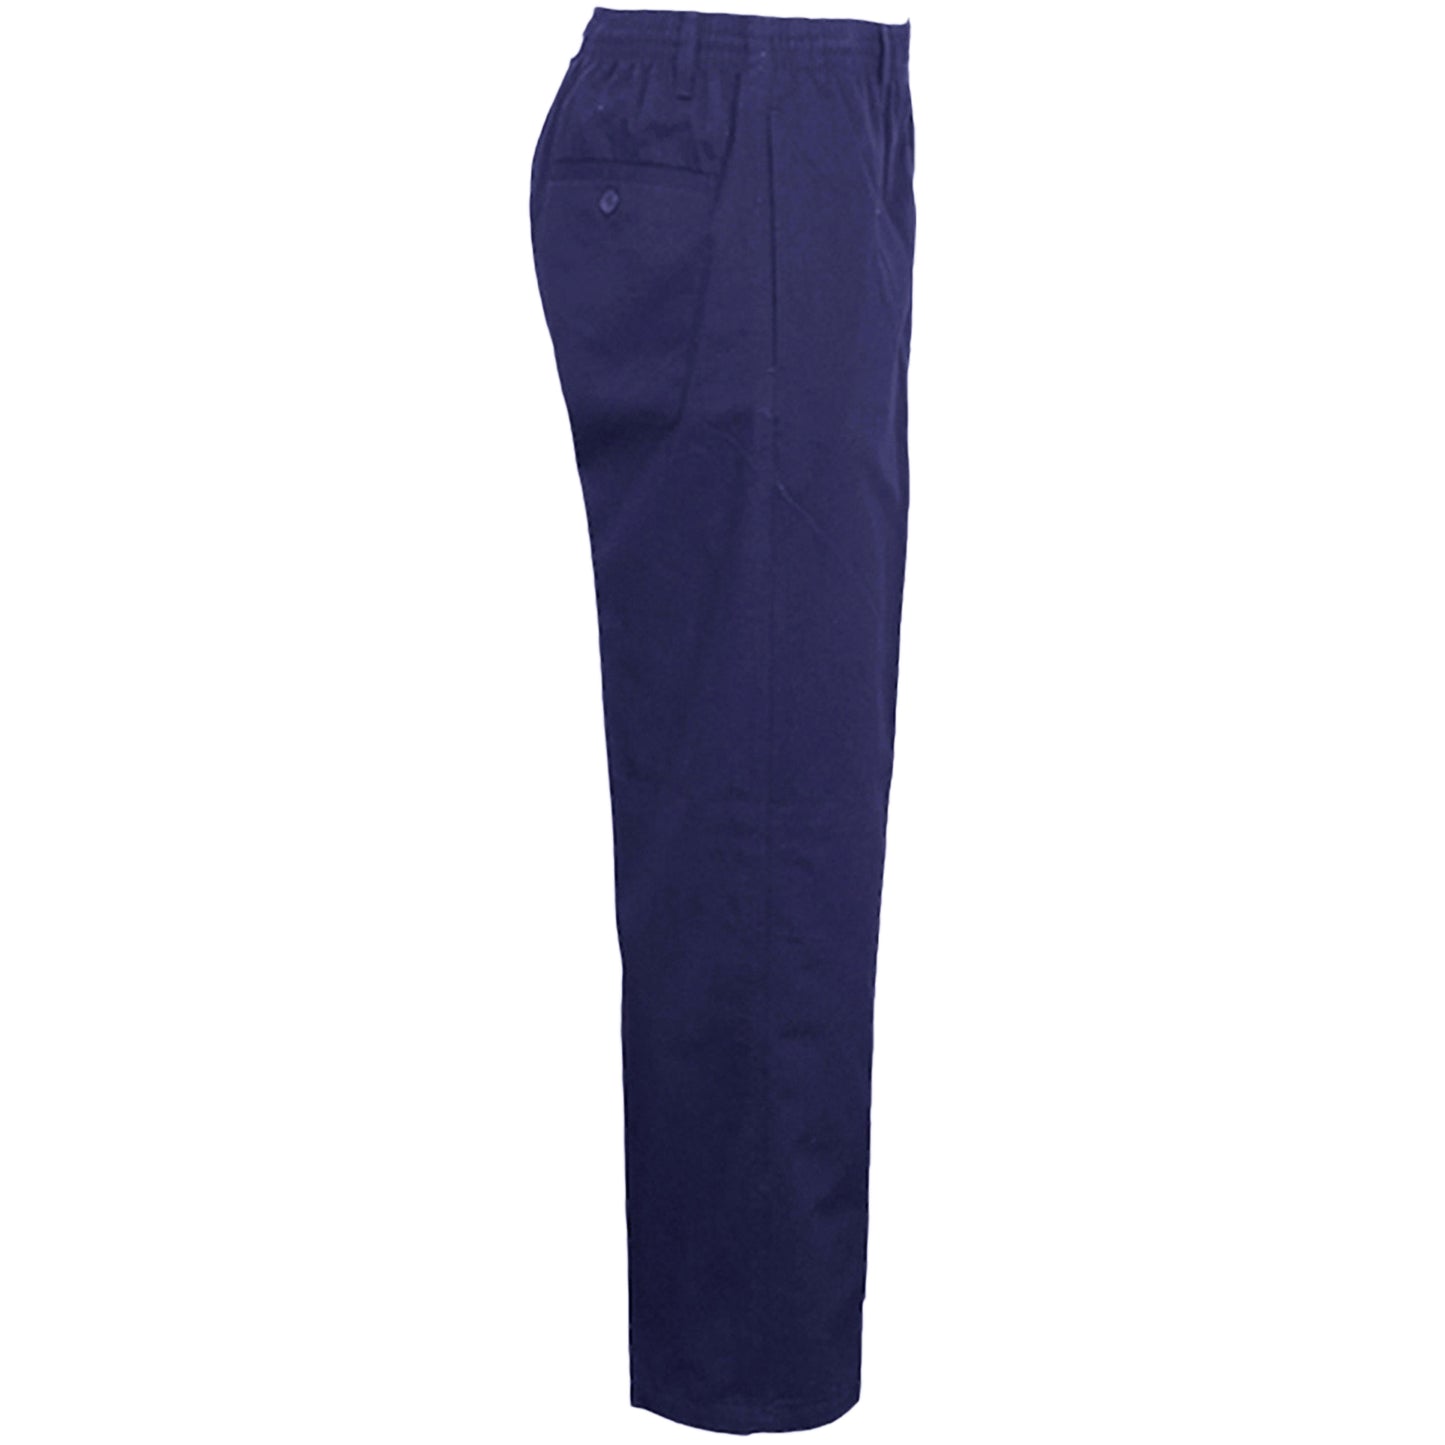 MENS RUGBY TROUSERS FULL ELASTICATED WAIST CASUAL SMART POCKET PANTS BIG PLUS SIZE 30" to 40"